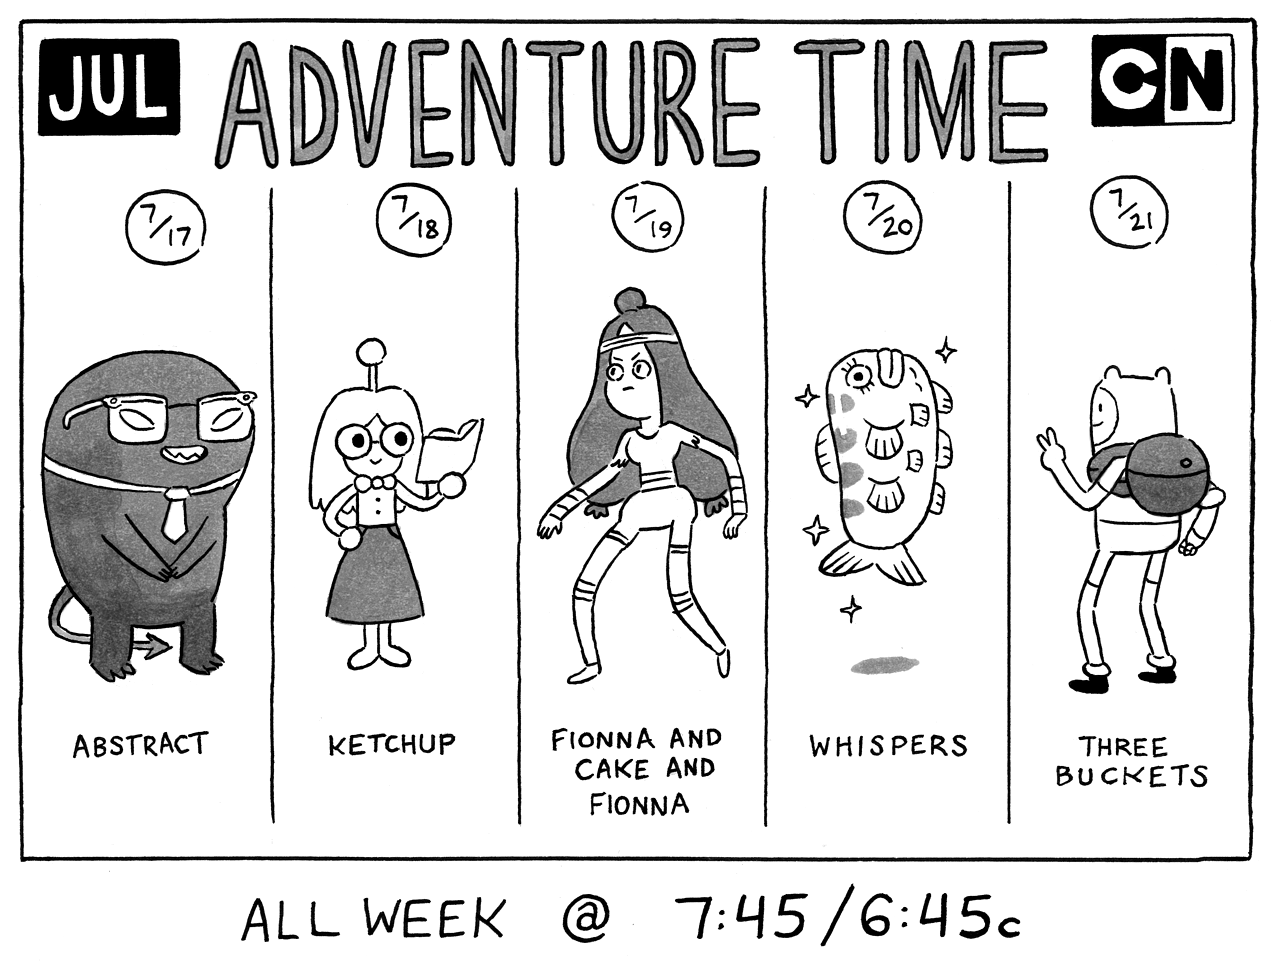 ADVENTURE TIME returns on Monday, July 17th!FIVE NIGHTS of NEW episodes premiering